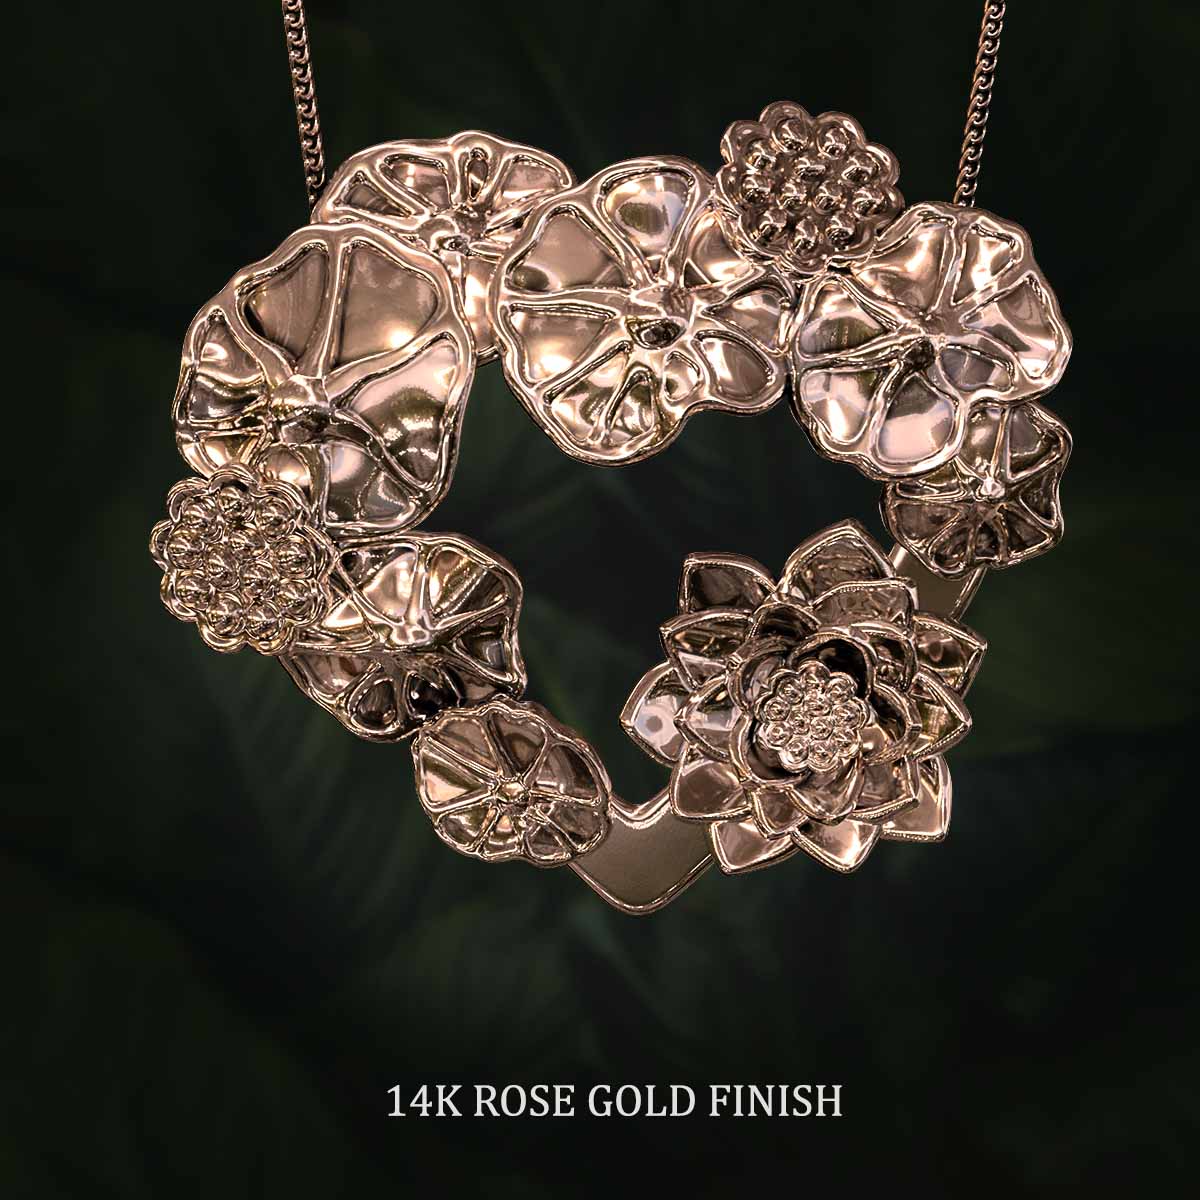 14k-Rose-Gold-Finish-Lotus-Leaves-with-Flower-and-Seed-Pods-Pendant-Jewelry-For-Necklace